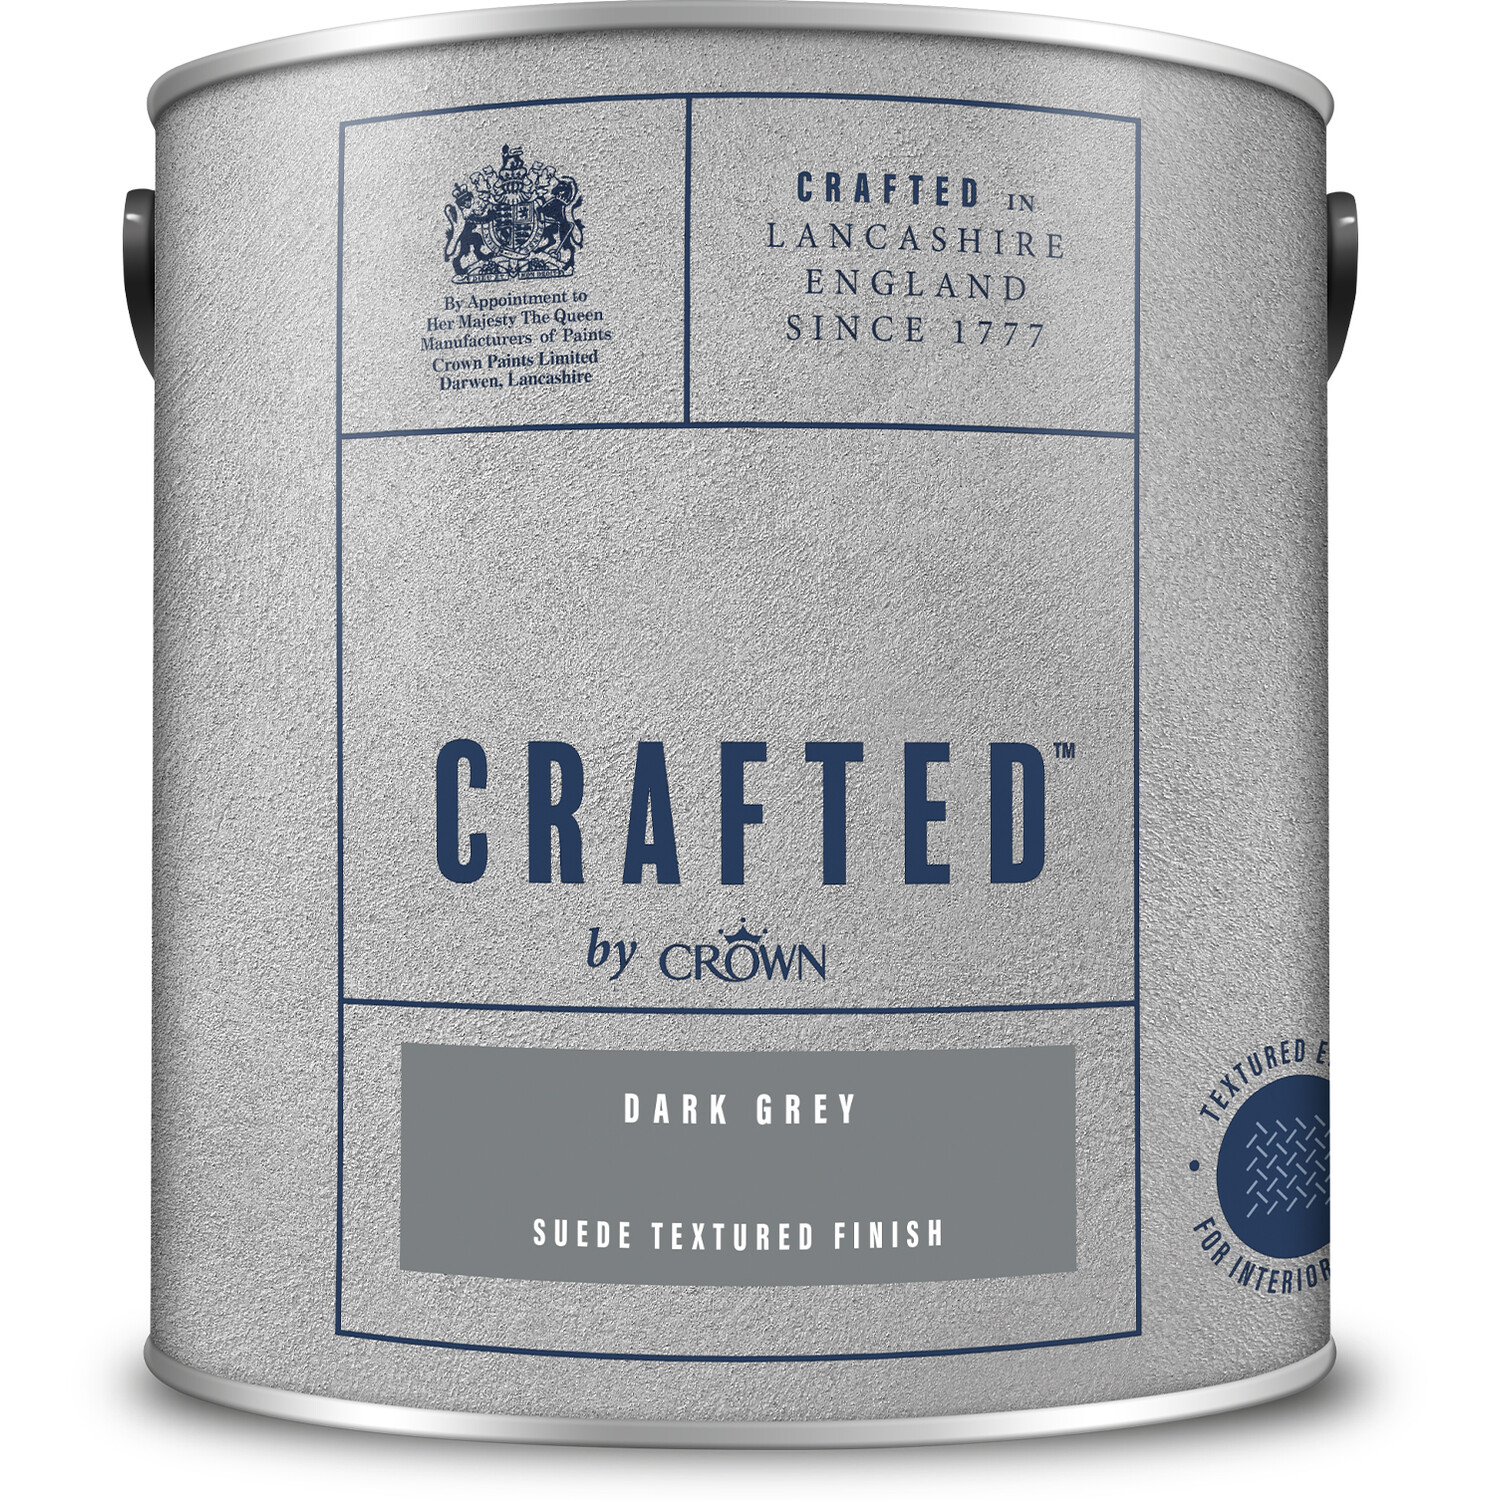 Crown Crafted Walls Dark Grey Suede Textured Finish Paint 2.5L Image 2